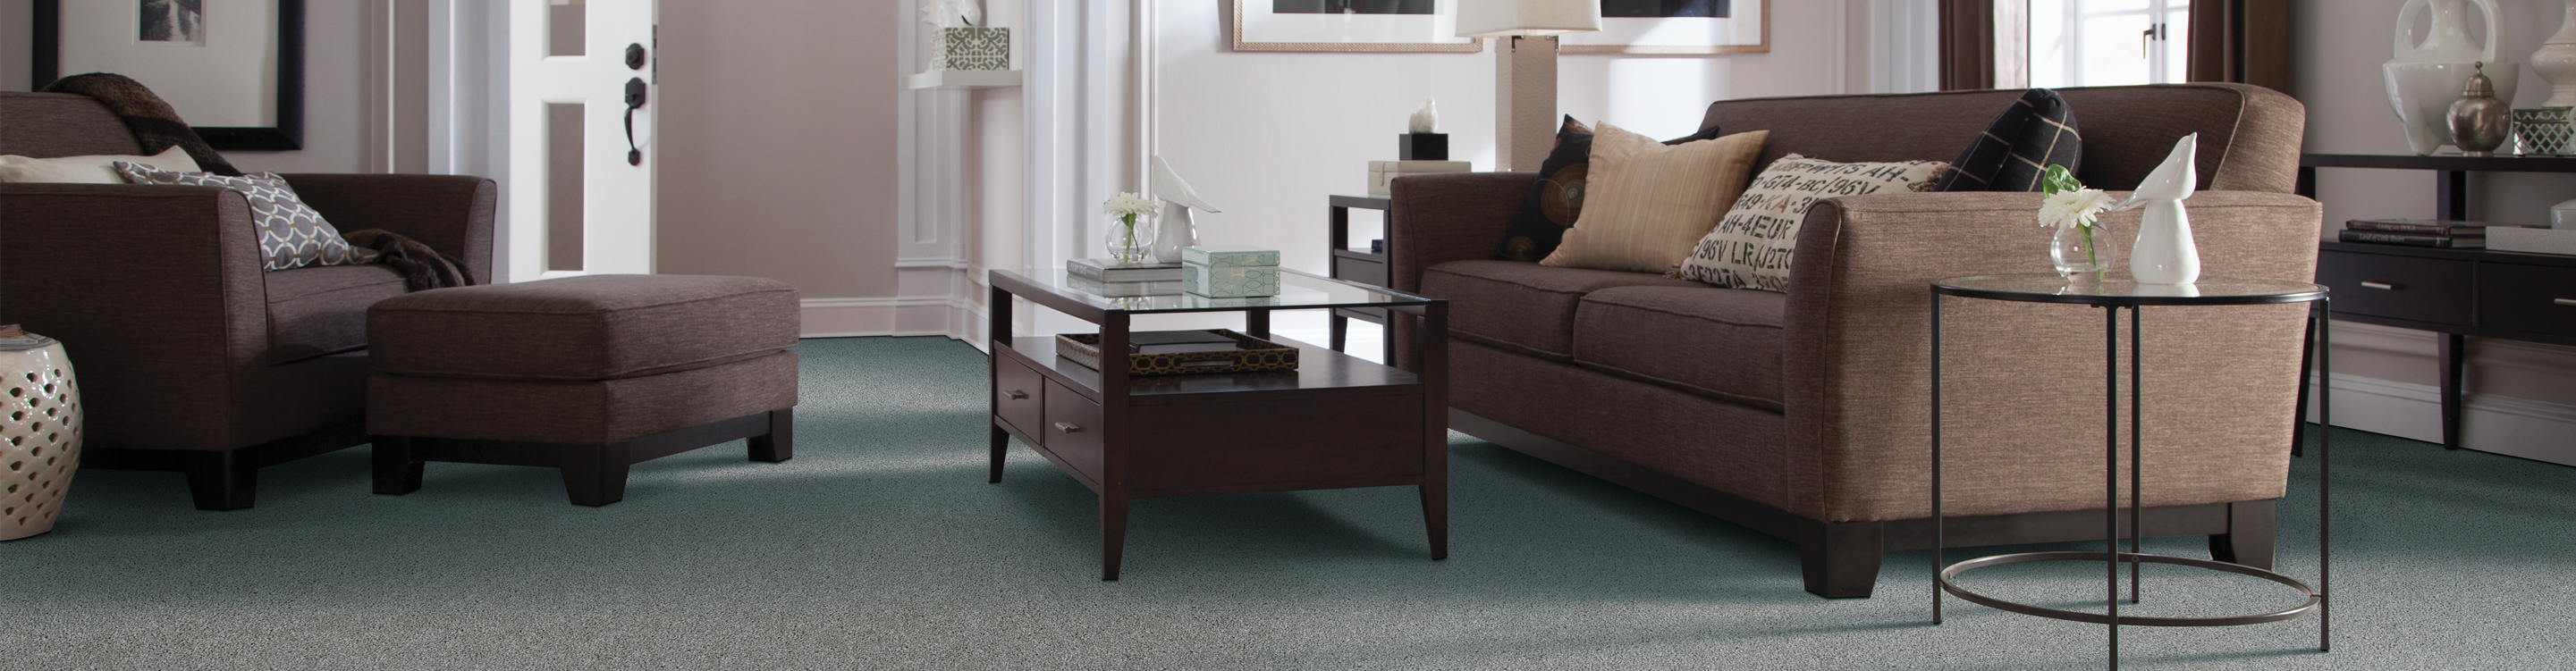 Dark green Berber carpet in living room with brown leather 